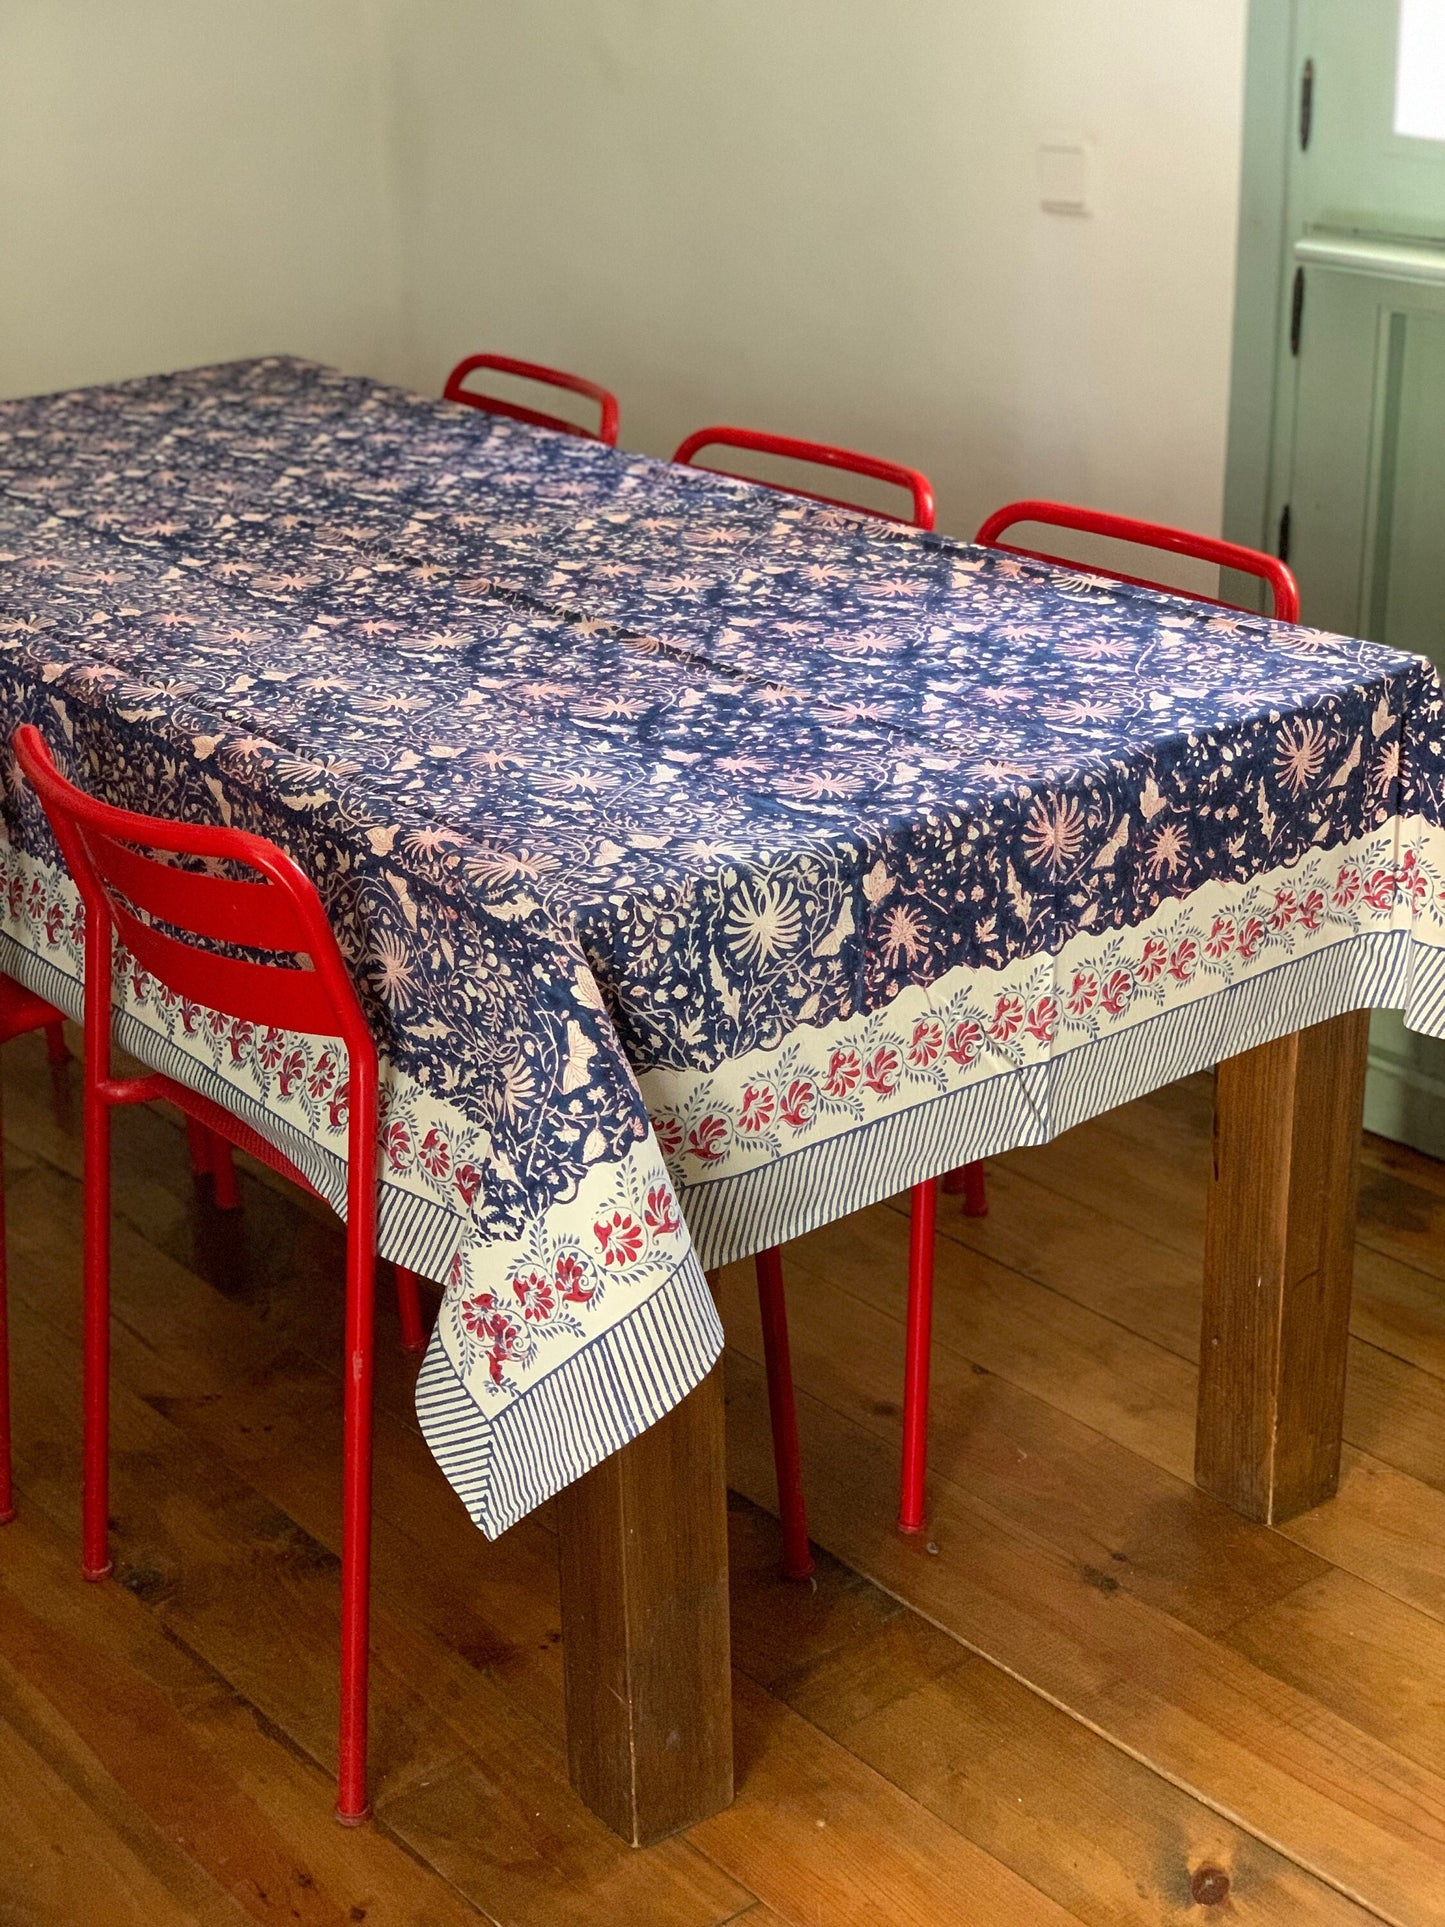 Pure cotton block print tablecloth handmade in India · Six diners · Boho chic tablecloth 100% Indian cotton · Red flower blue